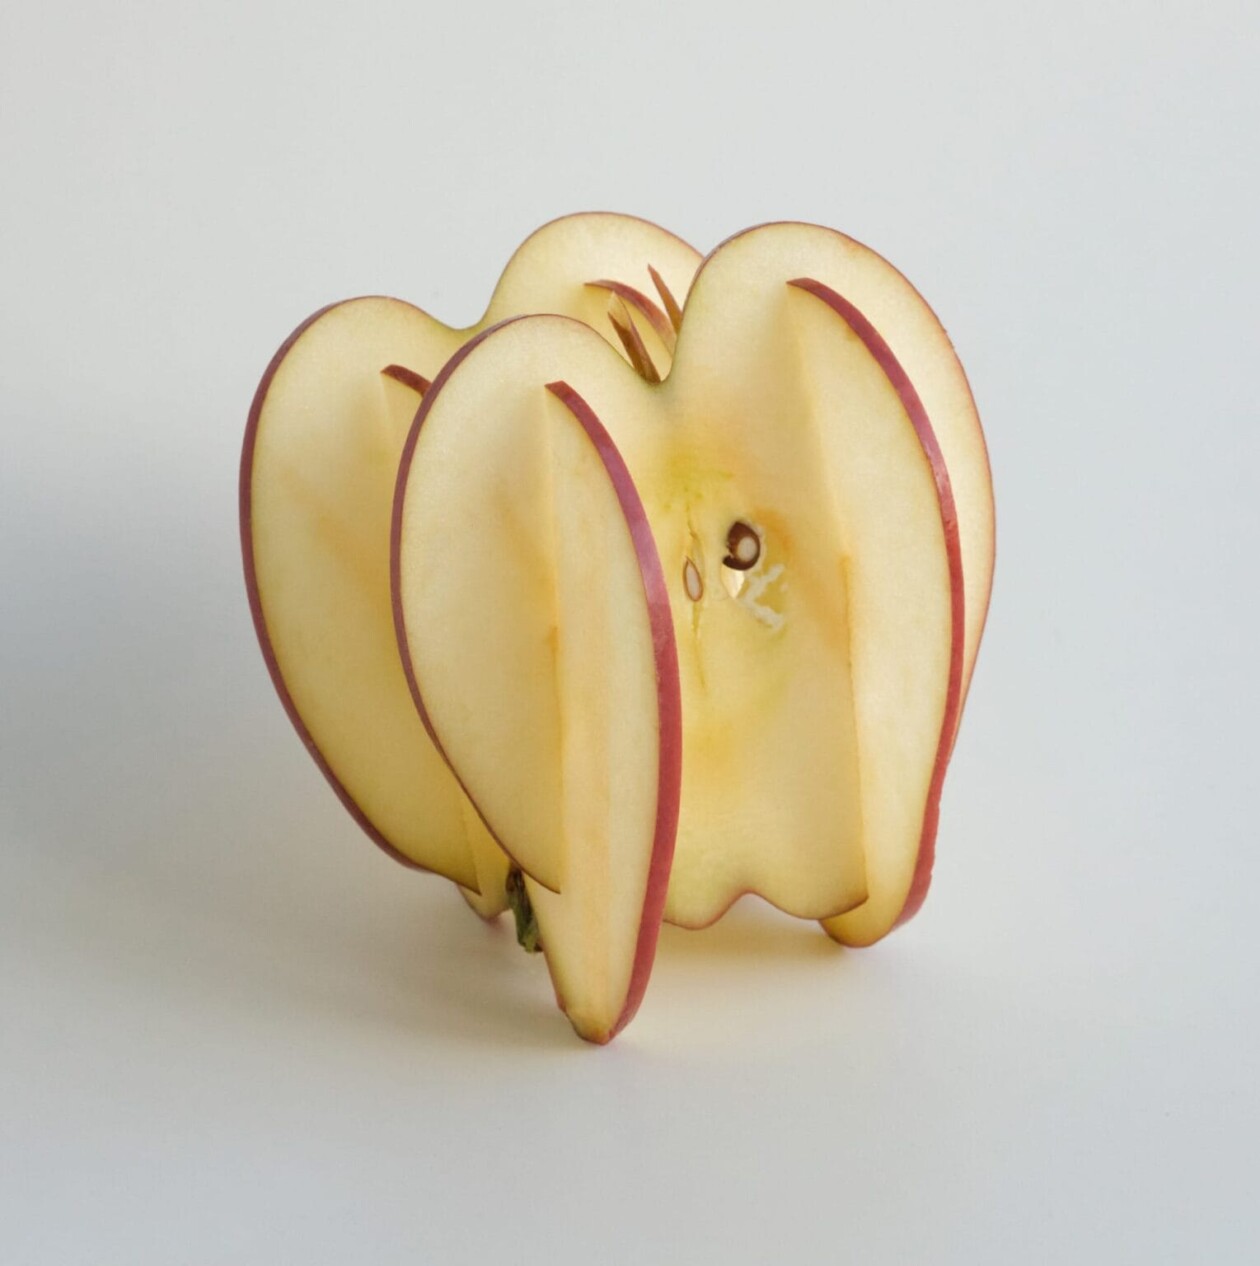 Smart And Playful Sculptures Carved Out Of Apples By Chinese Artist Can Sun (7)